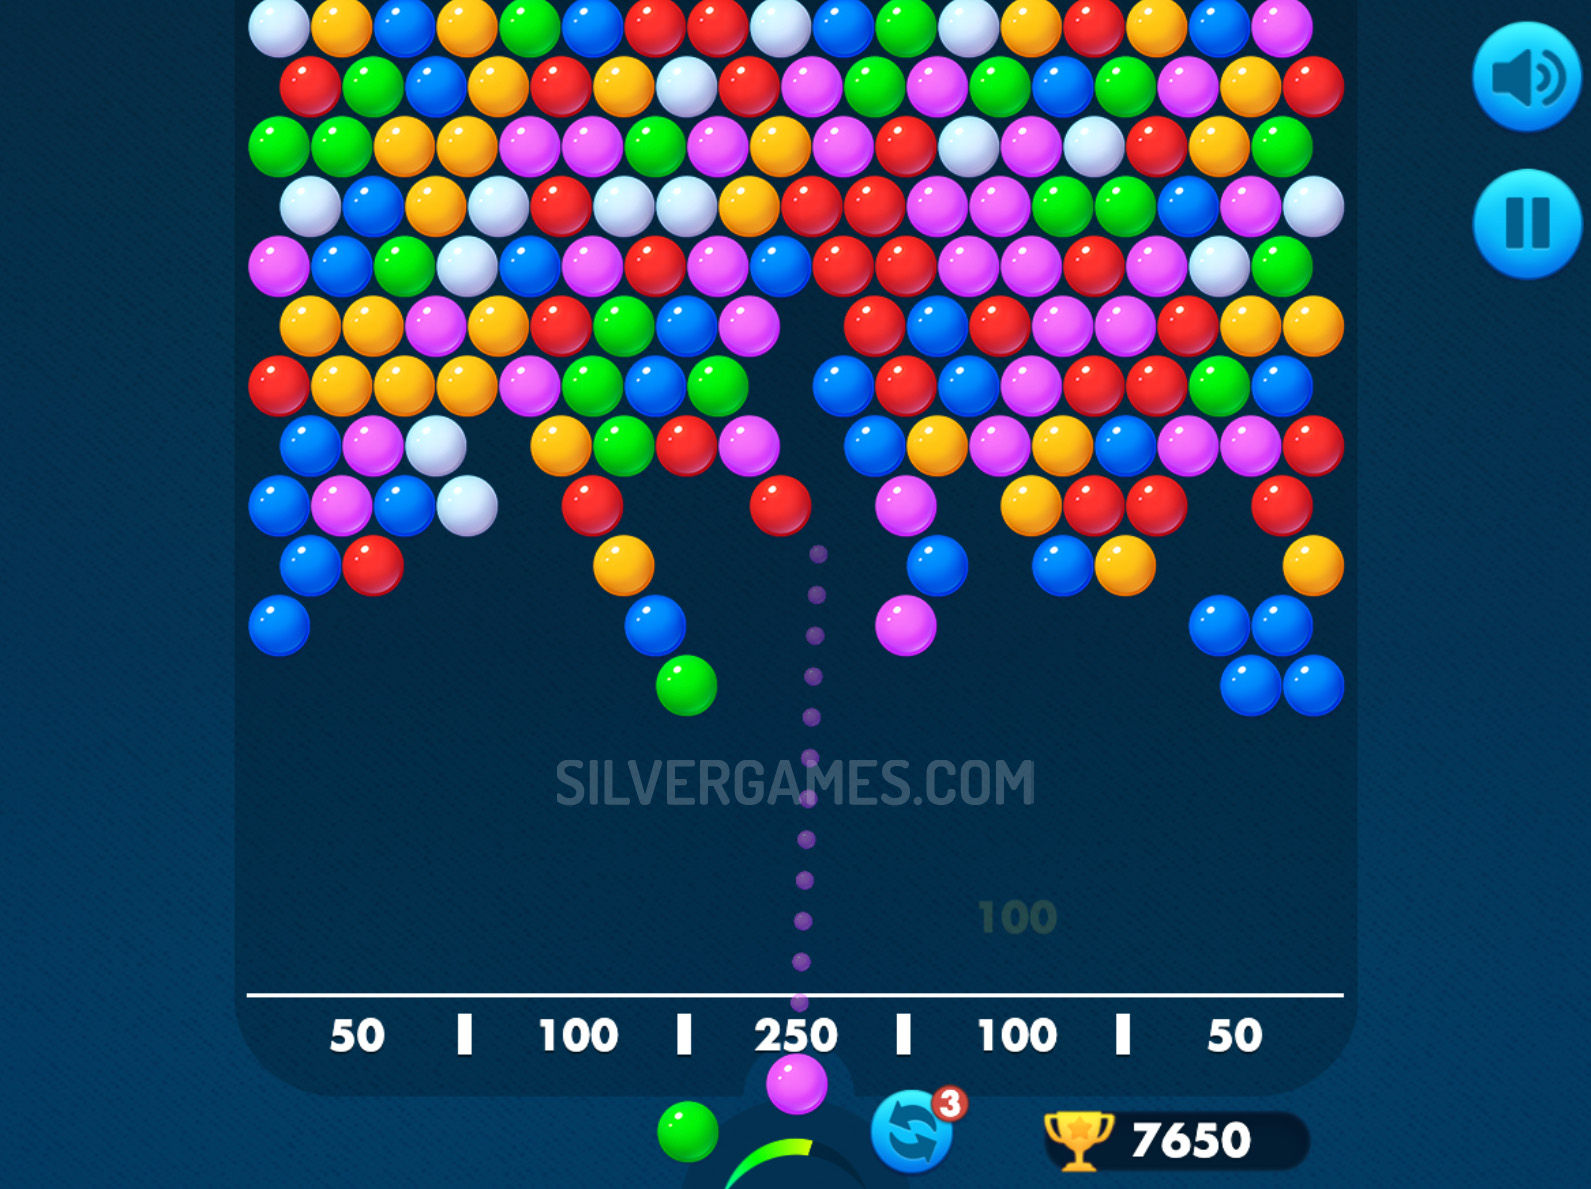 bubble shooter play now